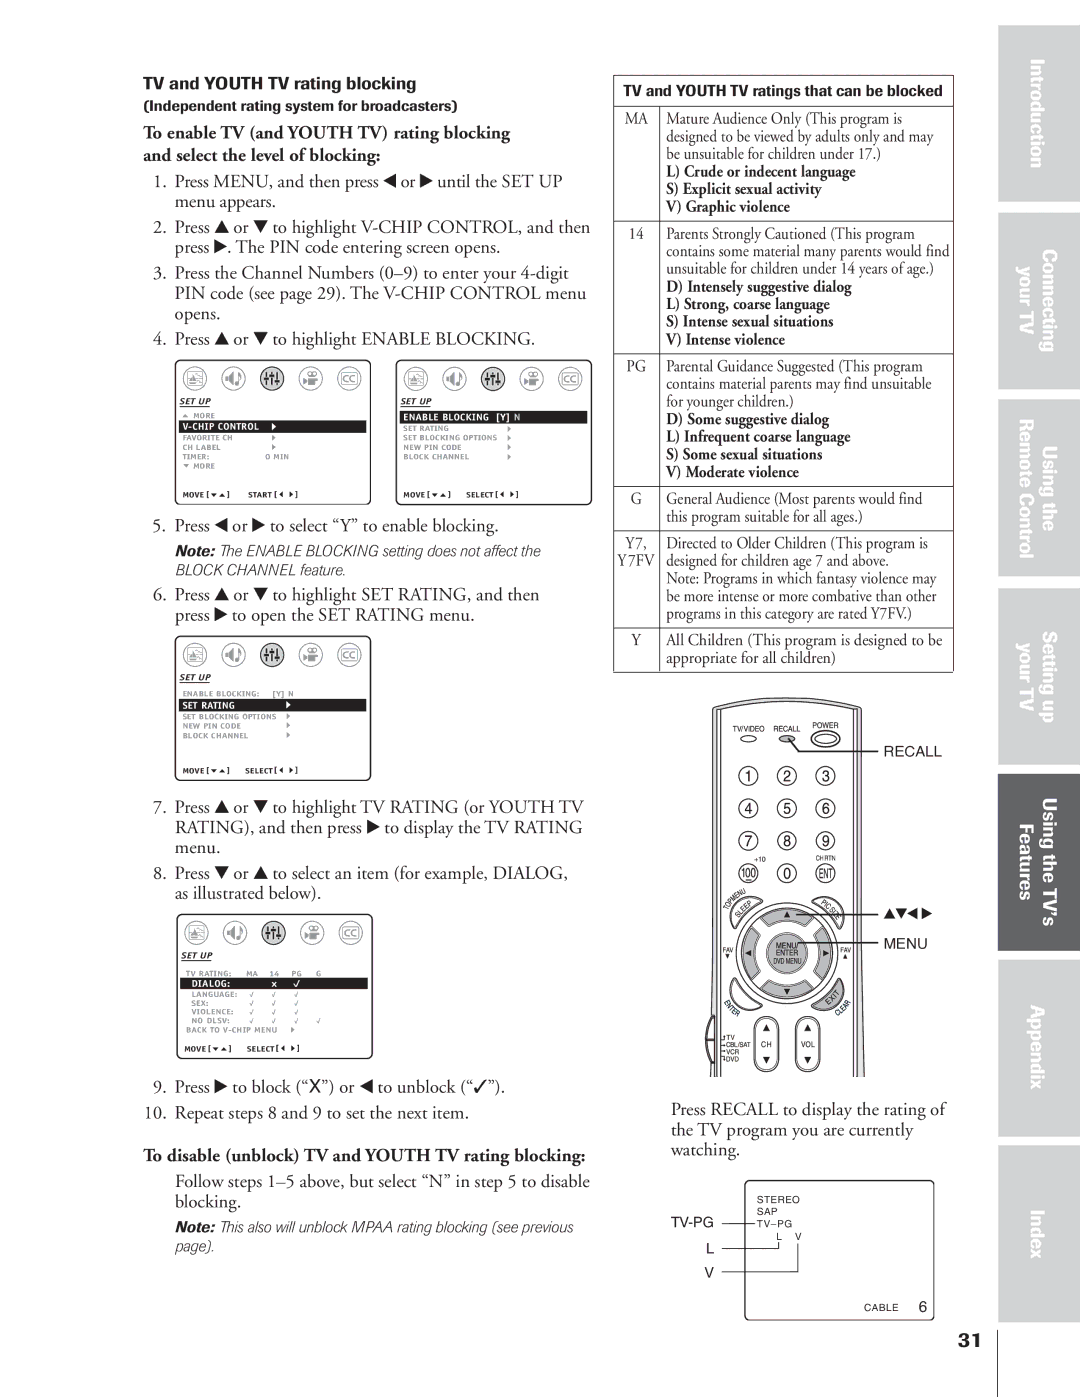 Toshiba 32AF14 owner manual To disable unblock TV and Youth TV rating blocking, TV and Youth TV ratings that can be blocked 